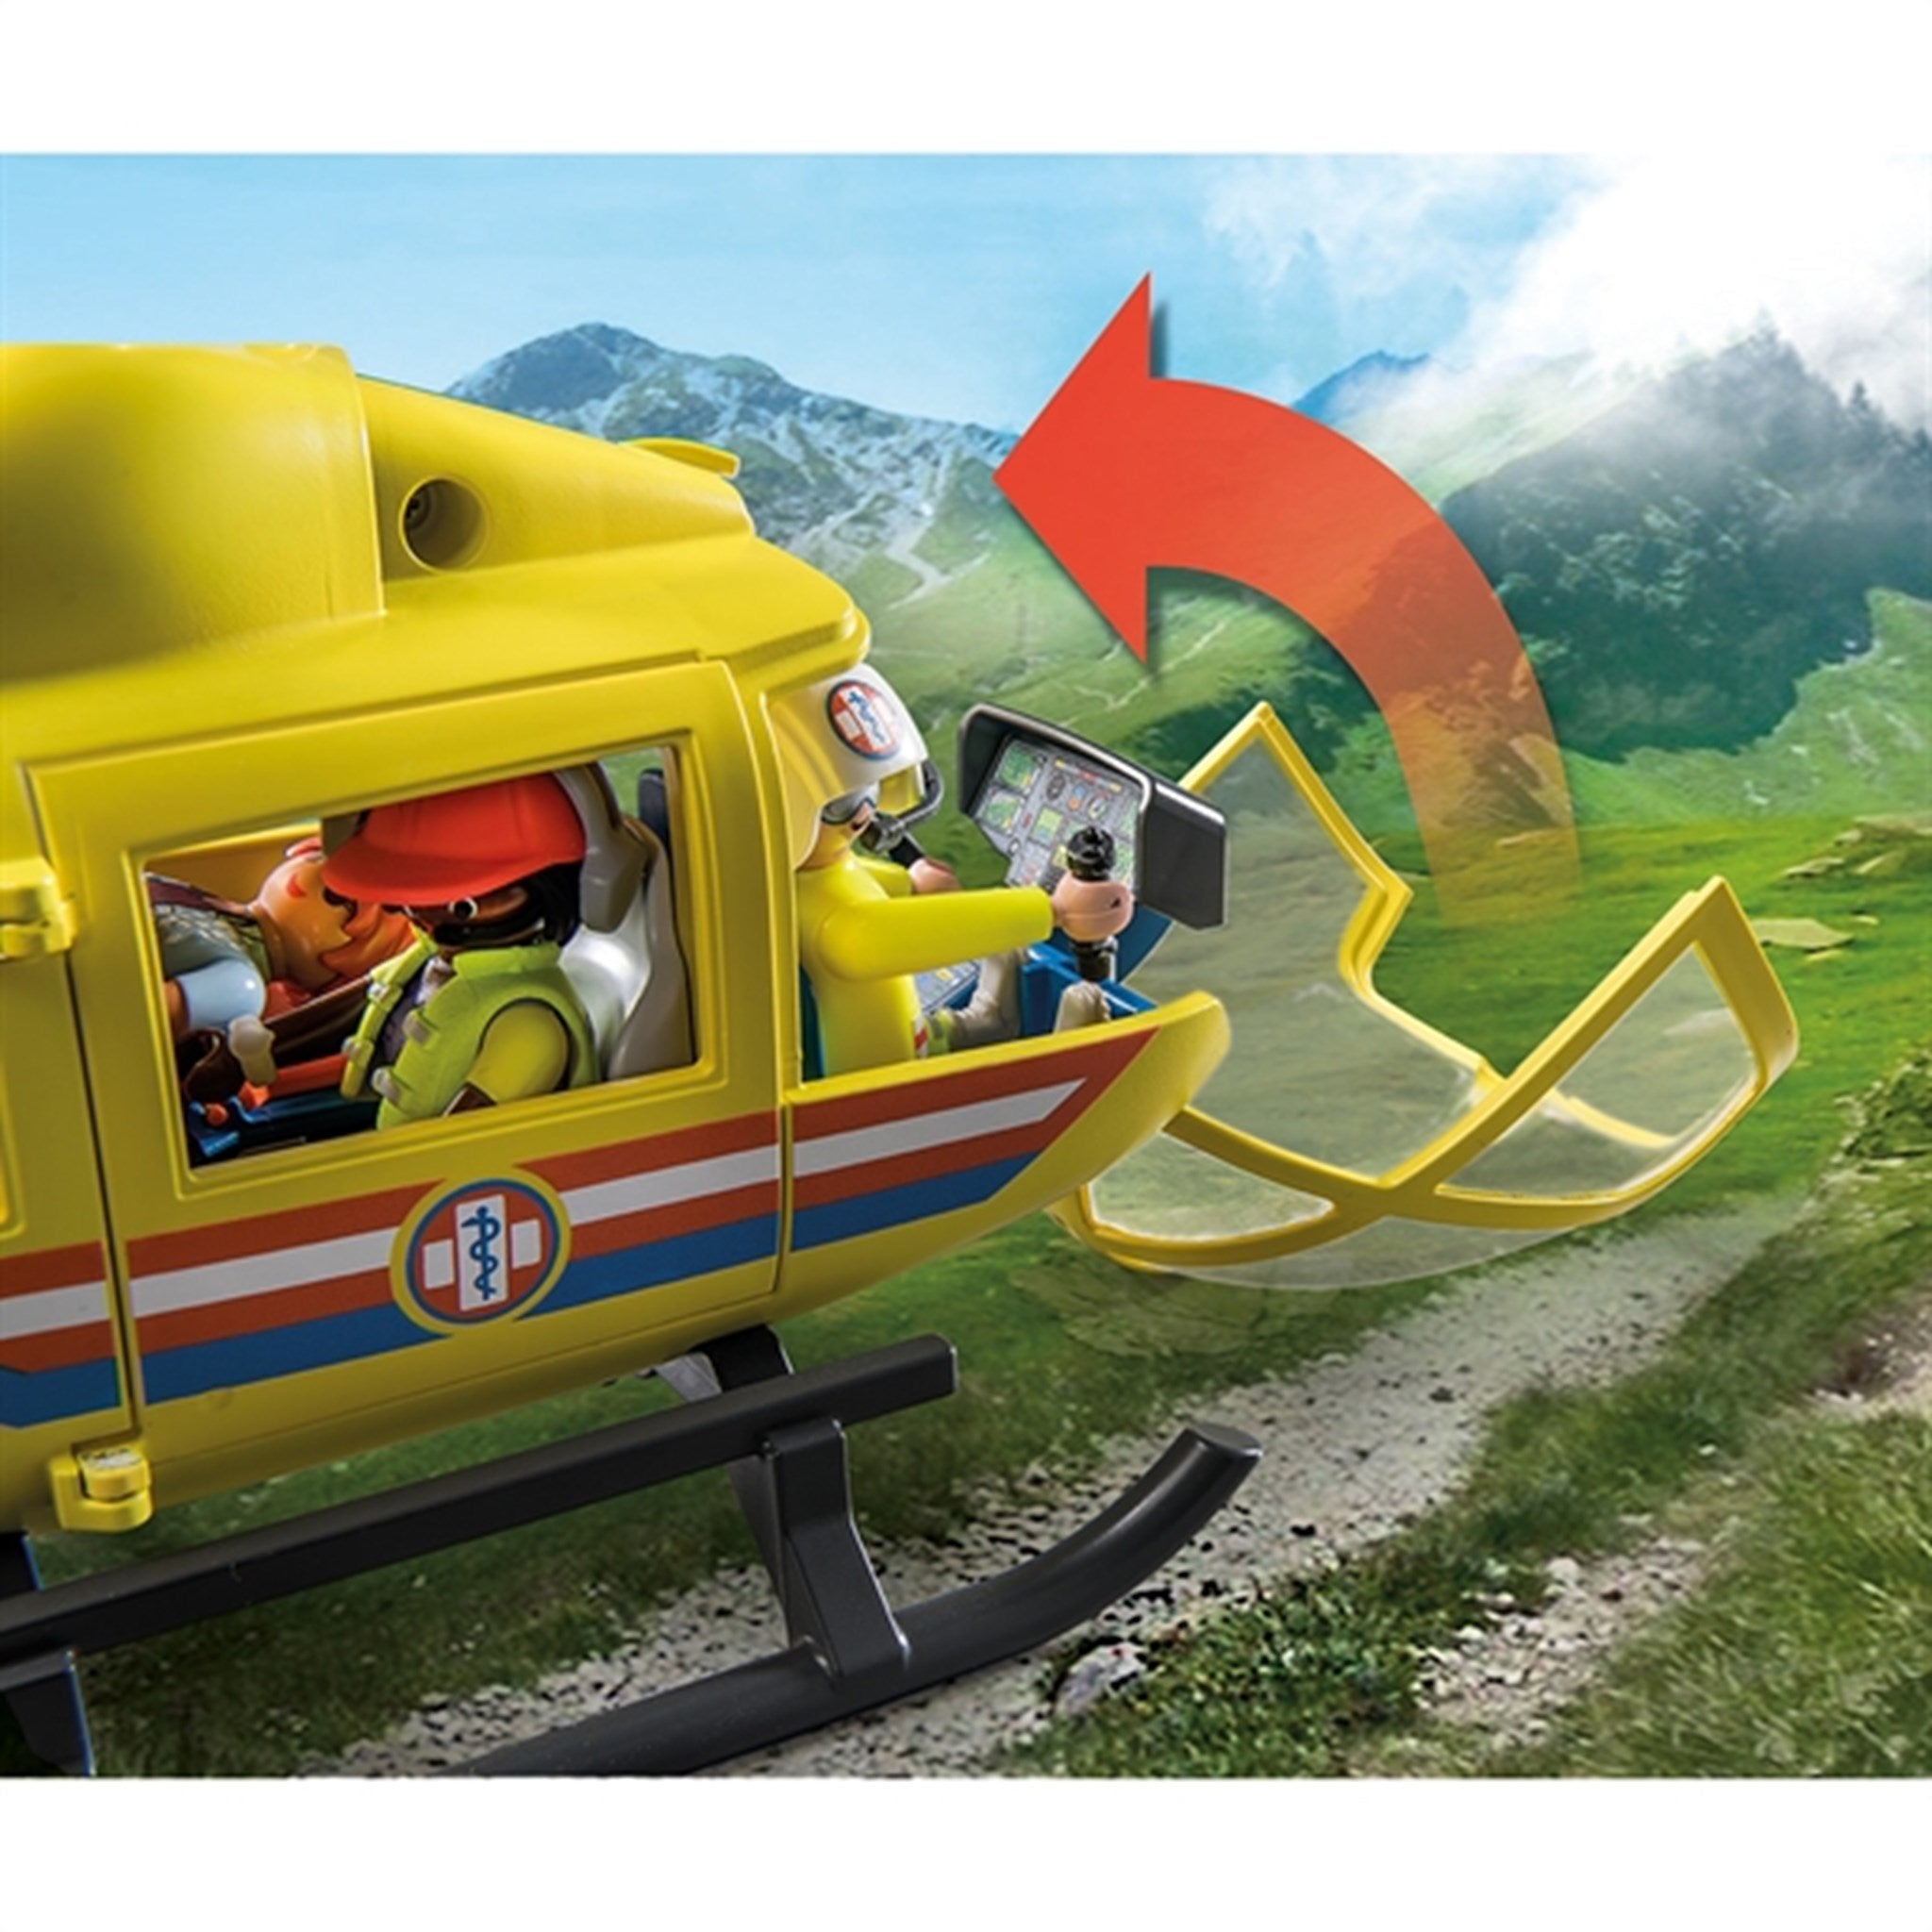 Playmobil® City Life - Rescue Helicopter 4